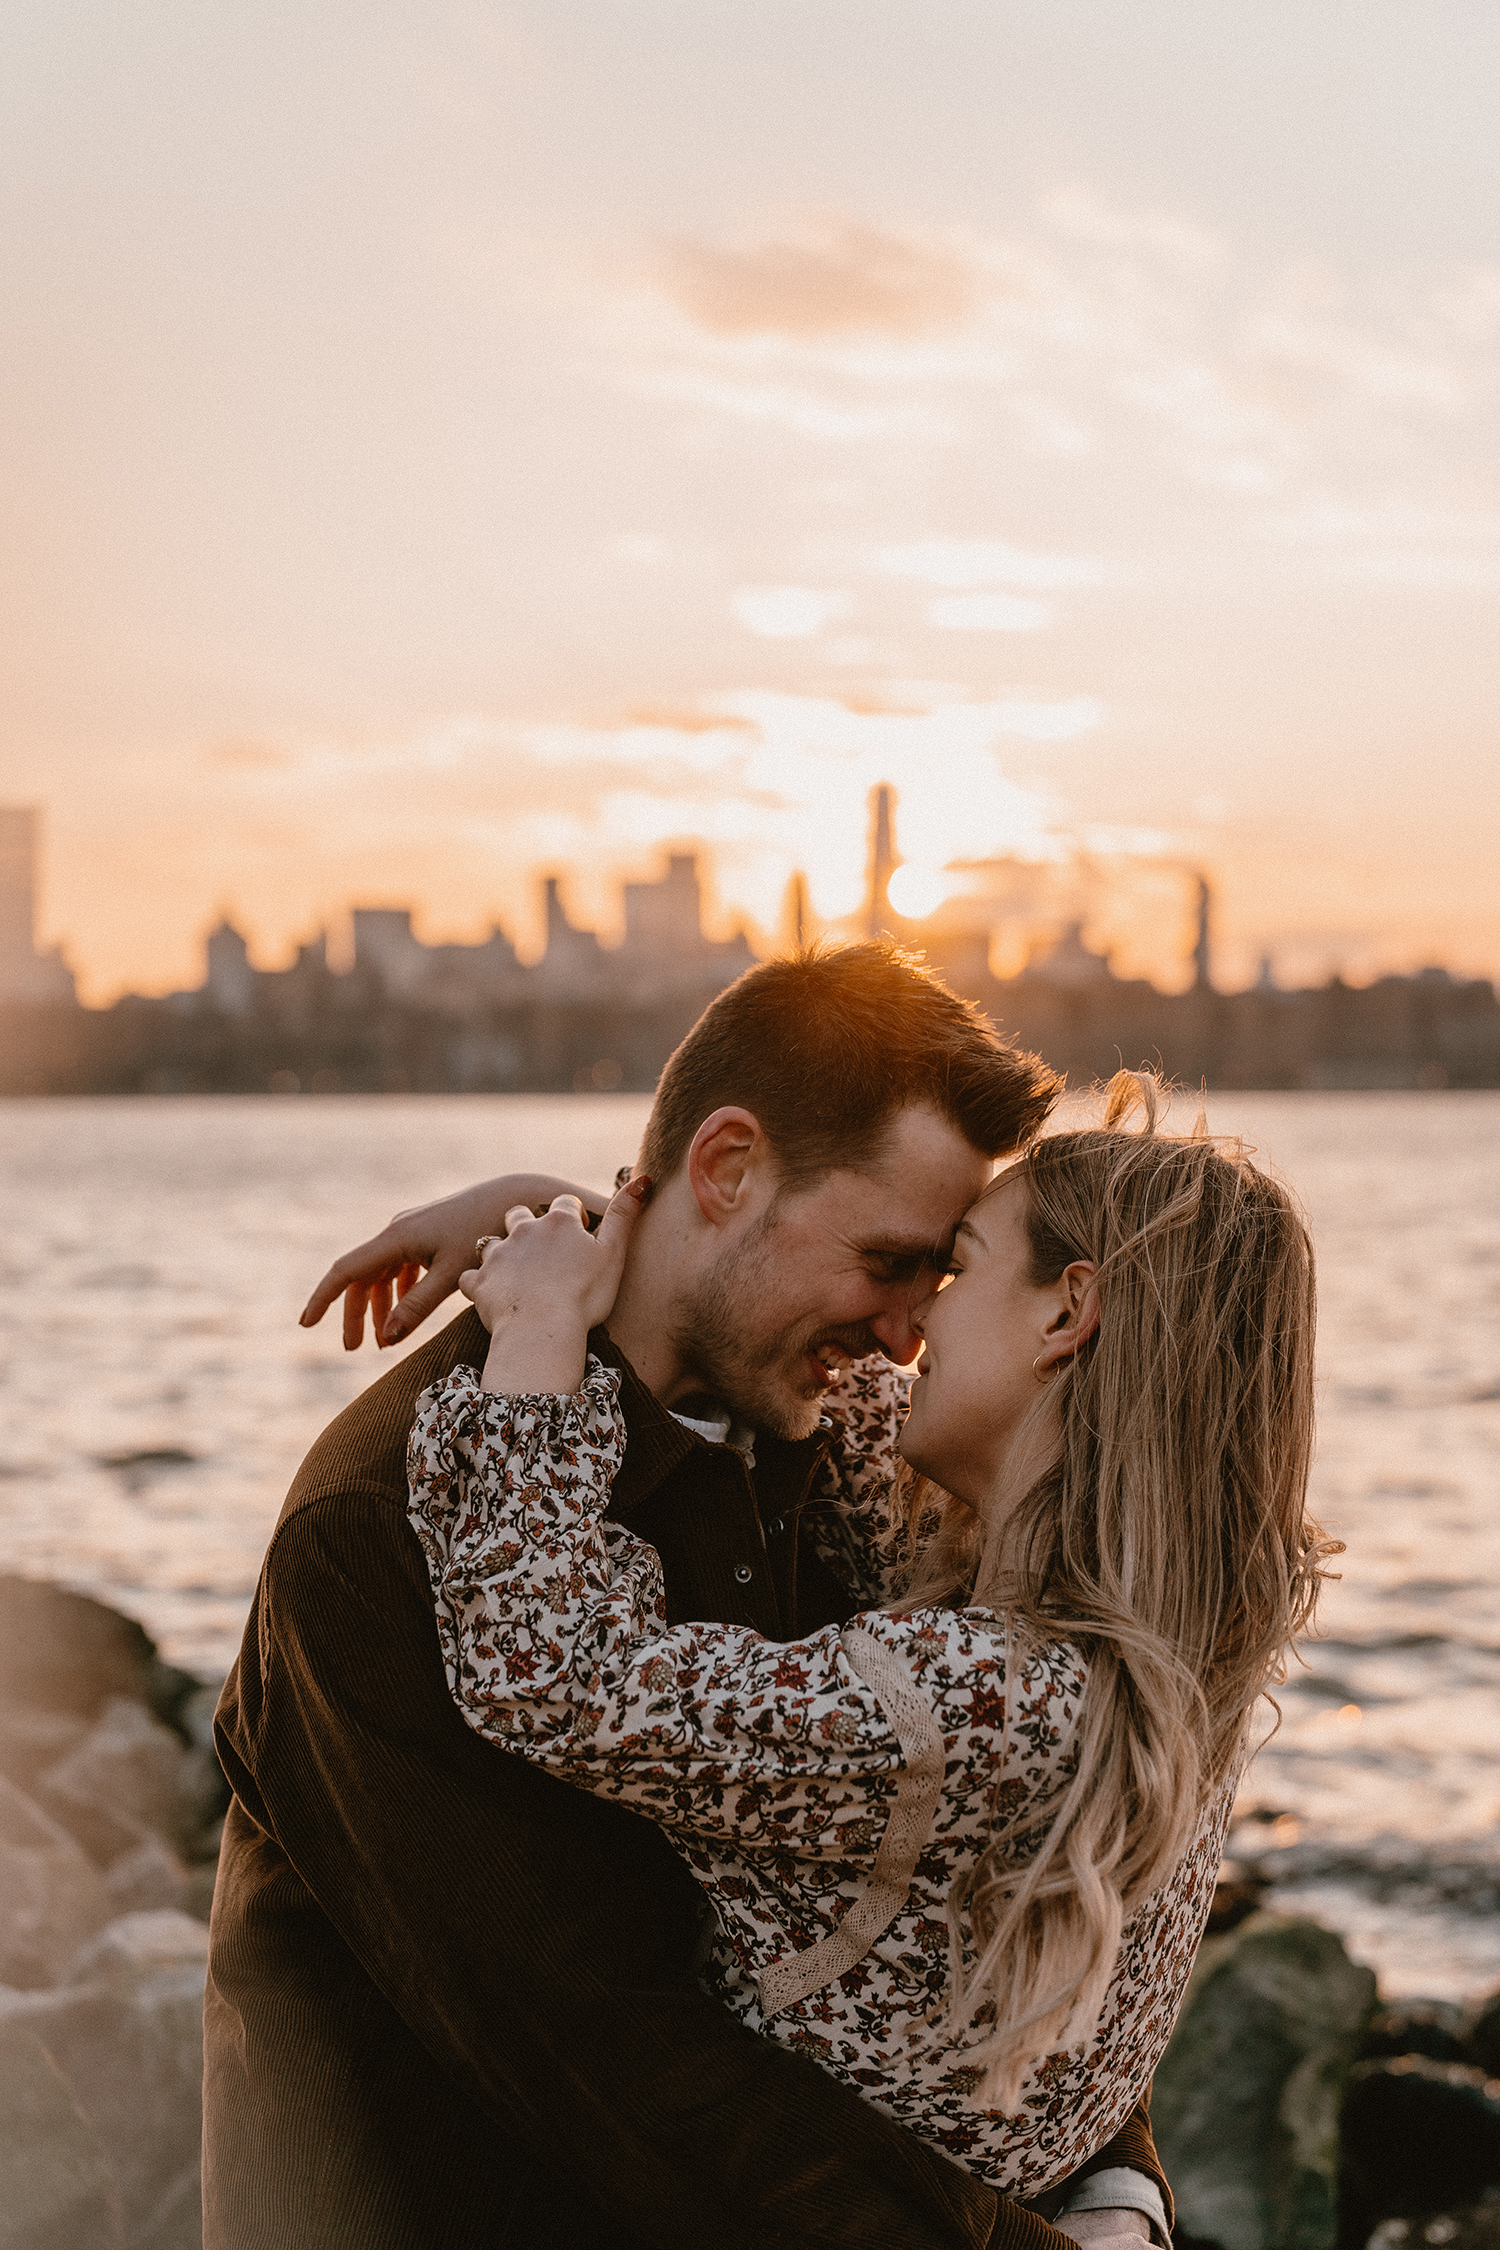 Engagement photos looking out over the NYC skyline during golden hour.